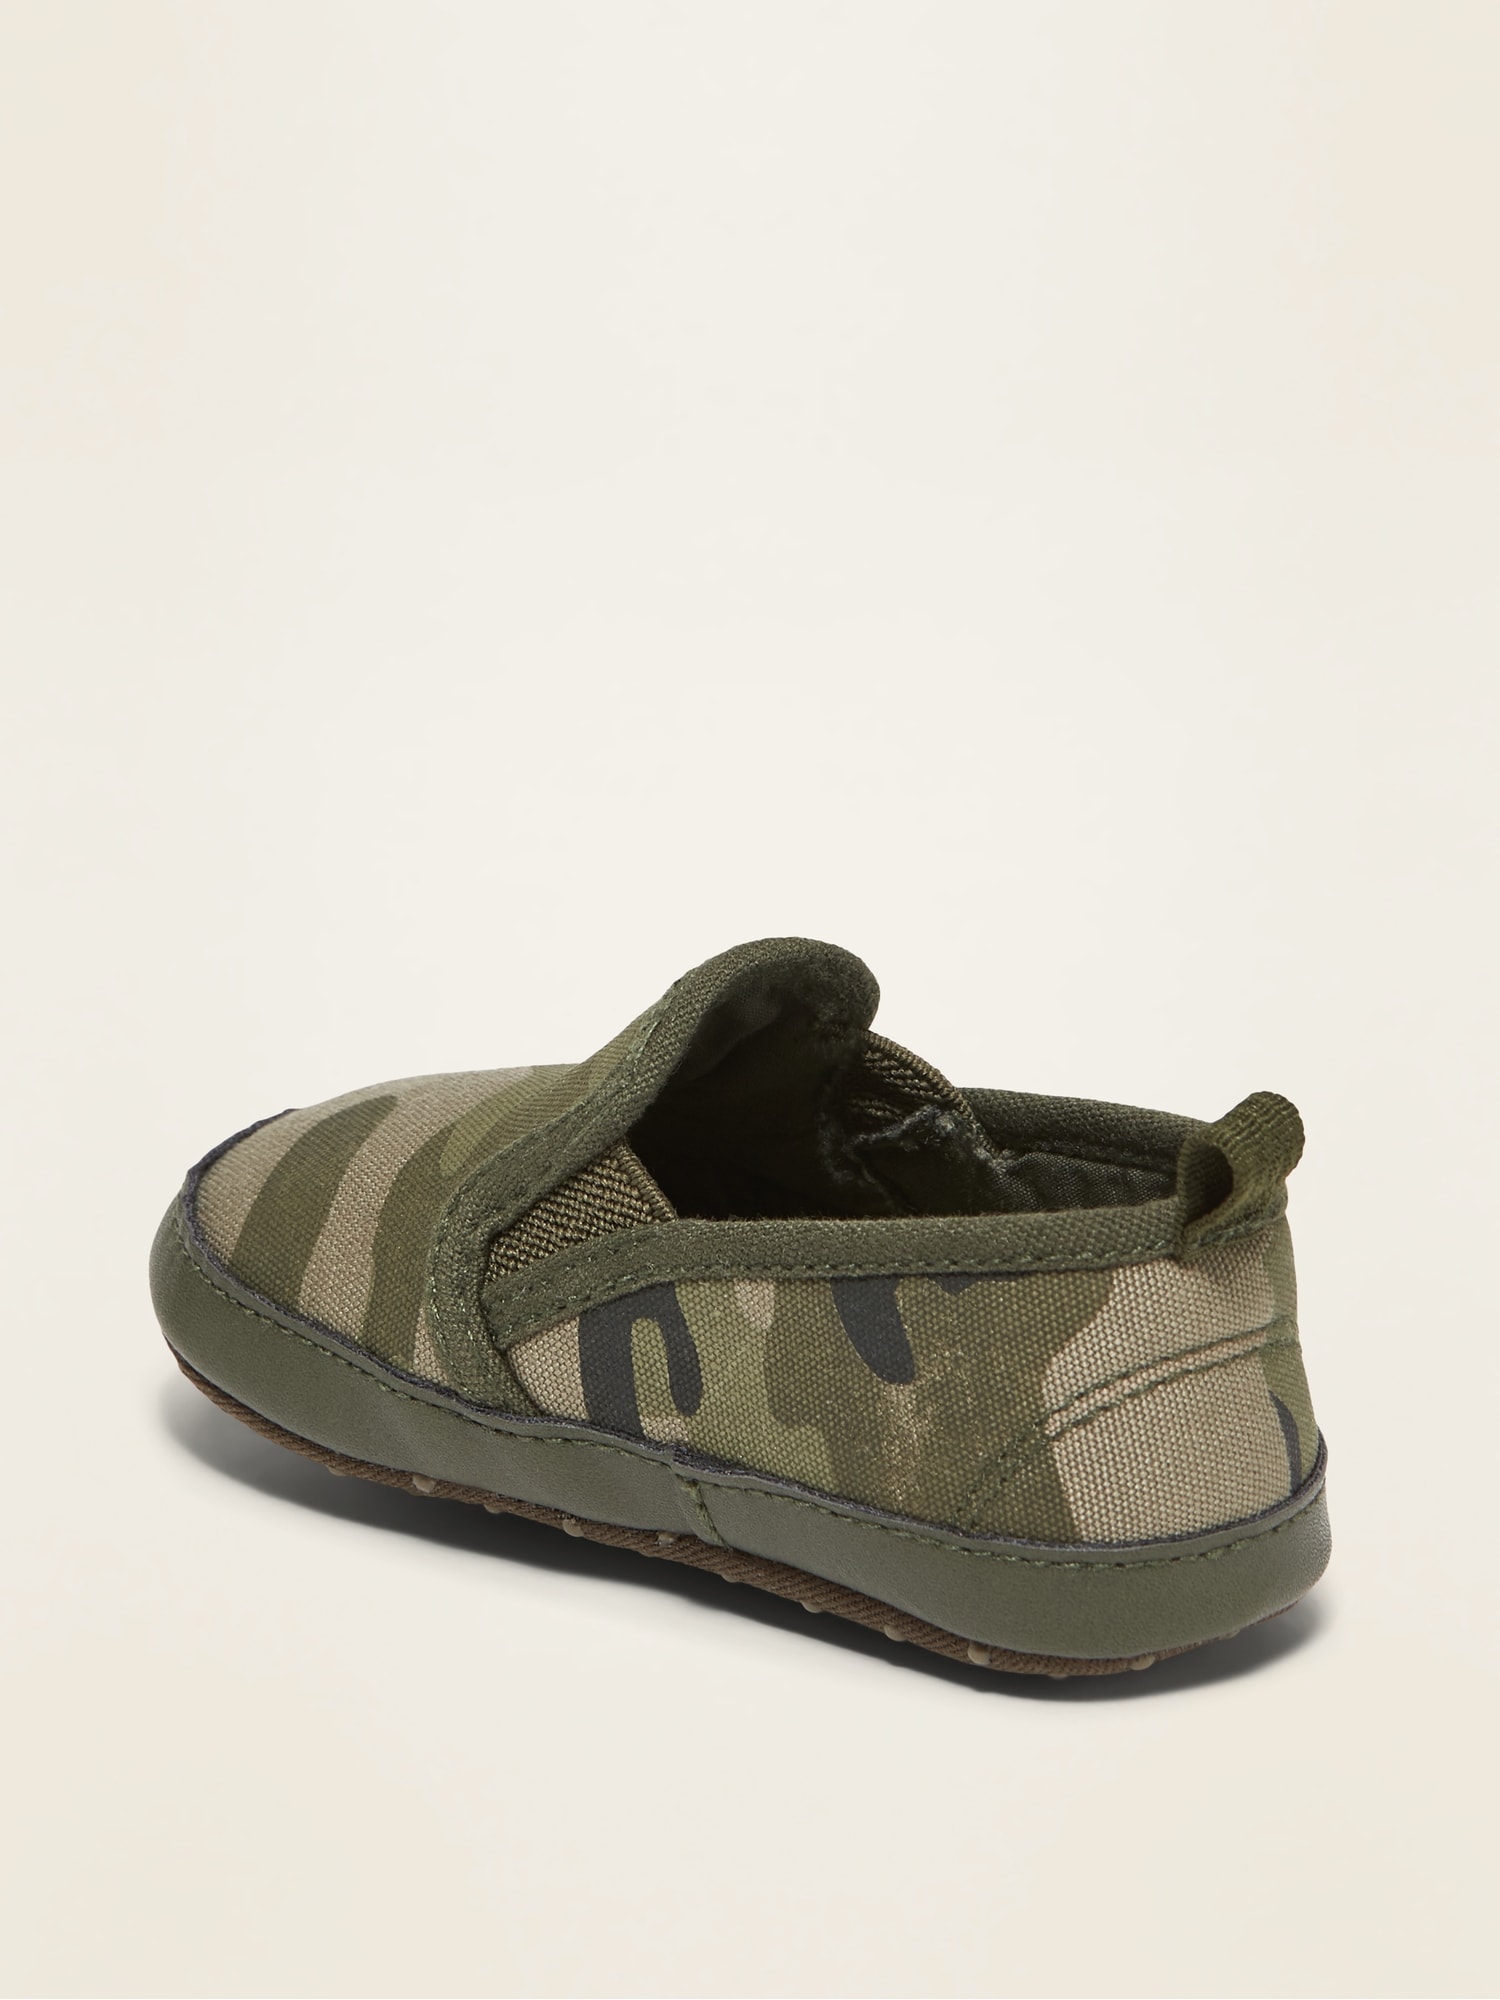 baby shoes old navy